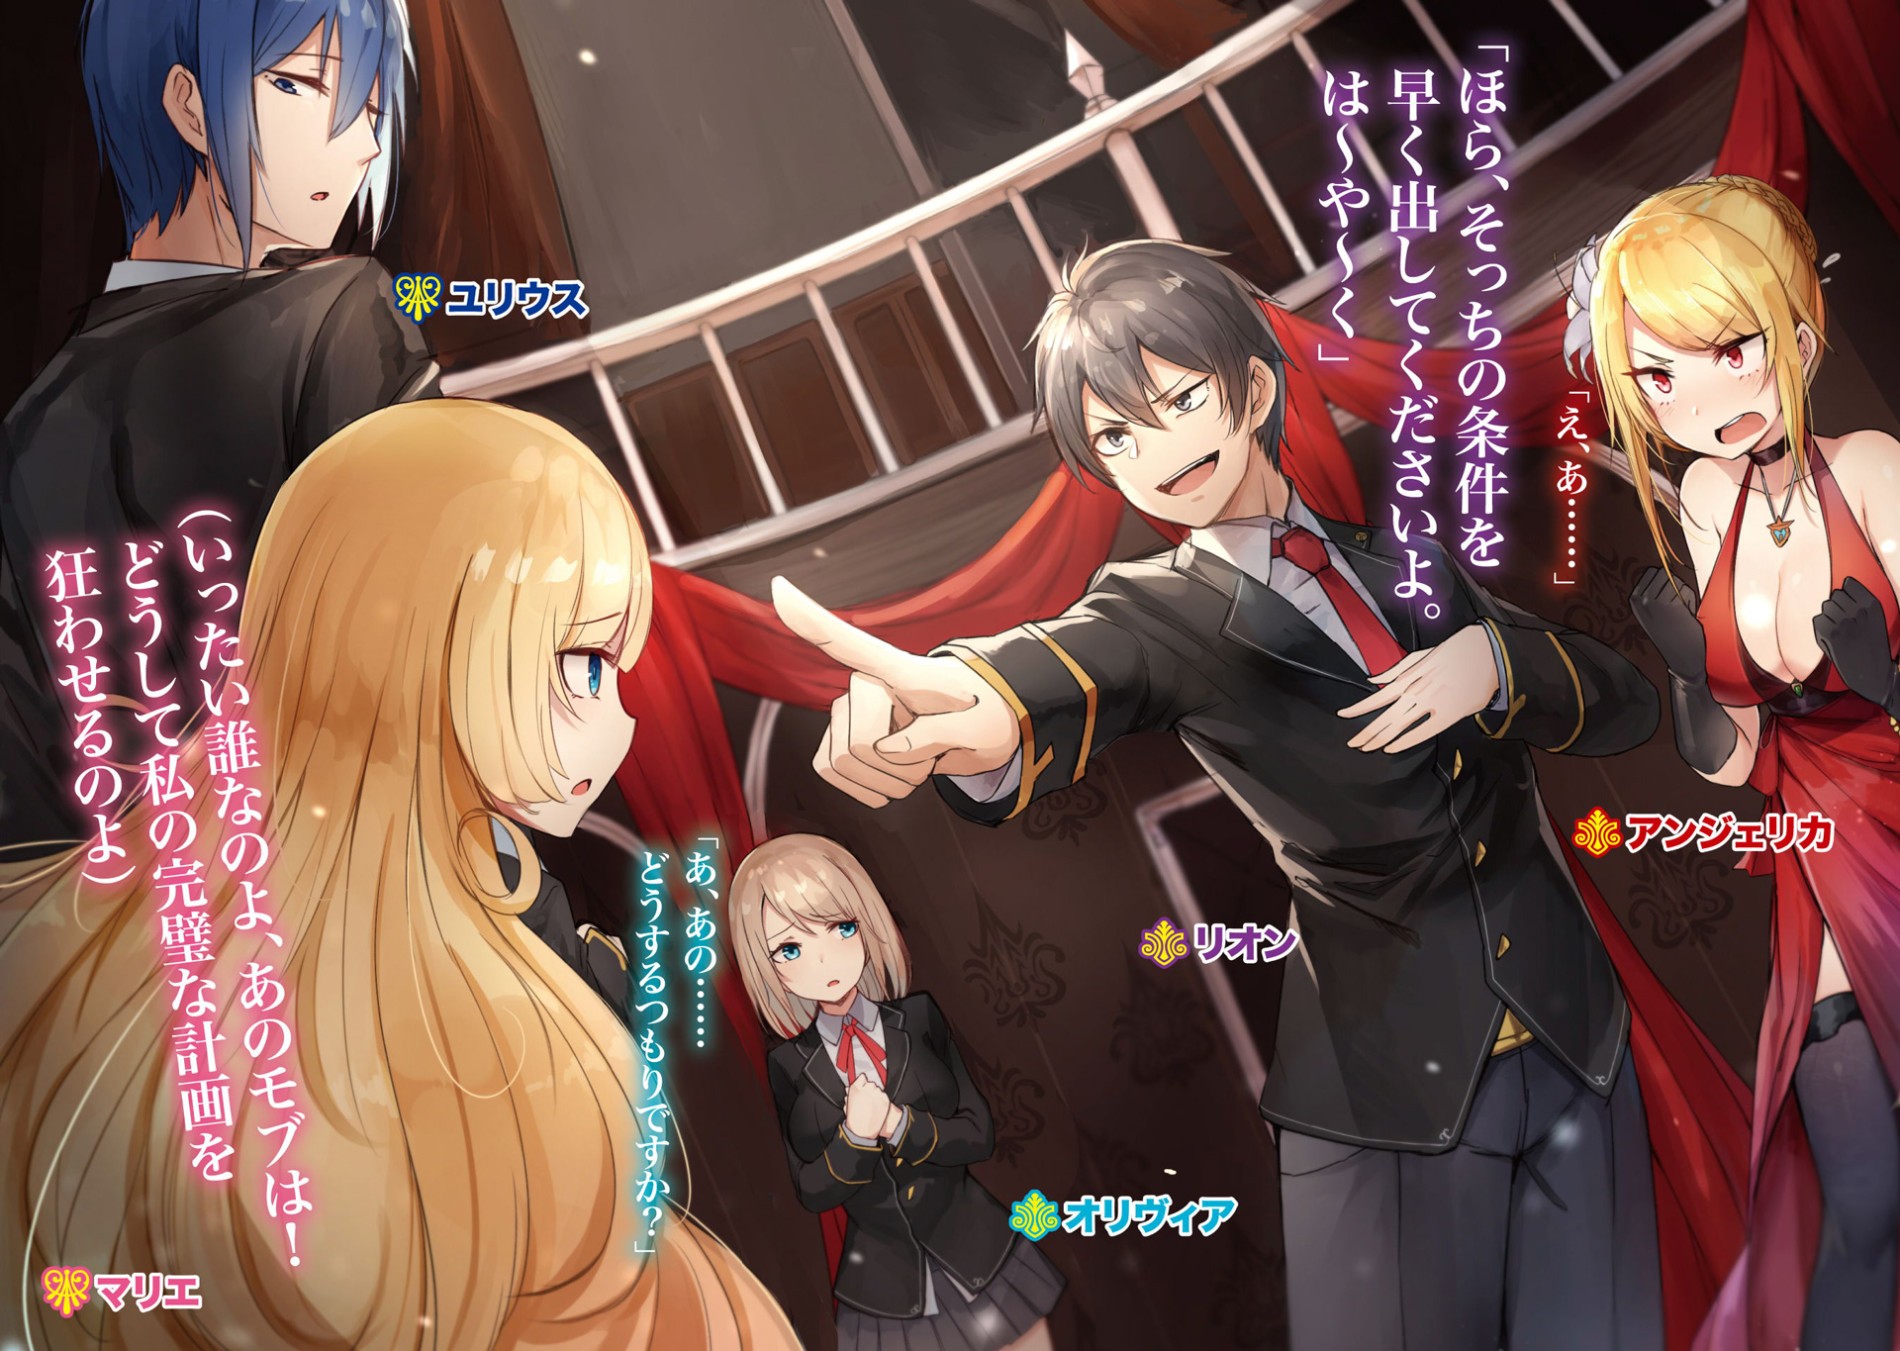 Anime Like Trapped in a Dating Sim: The World of Otome Games Is